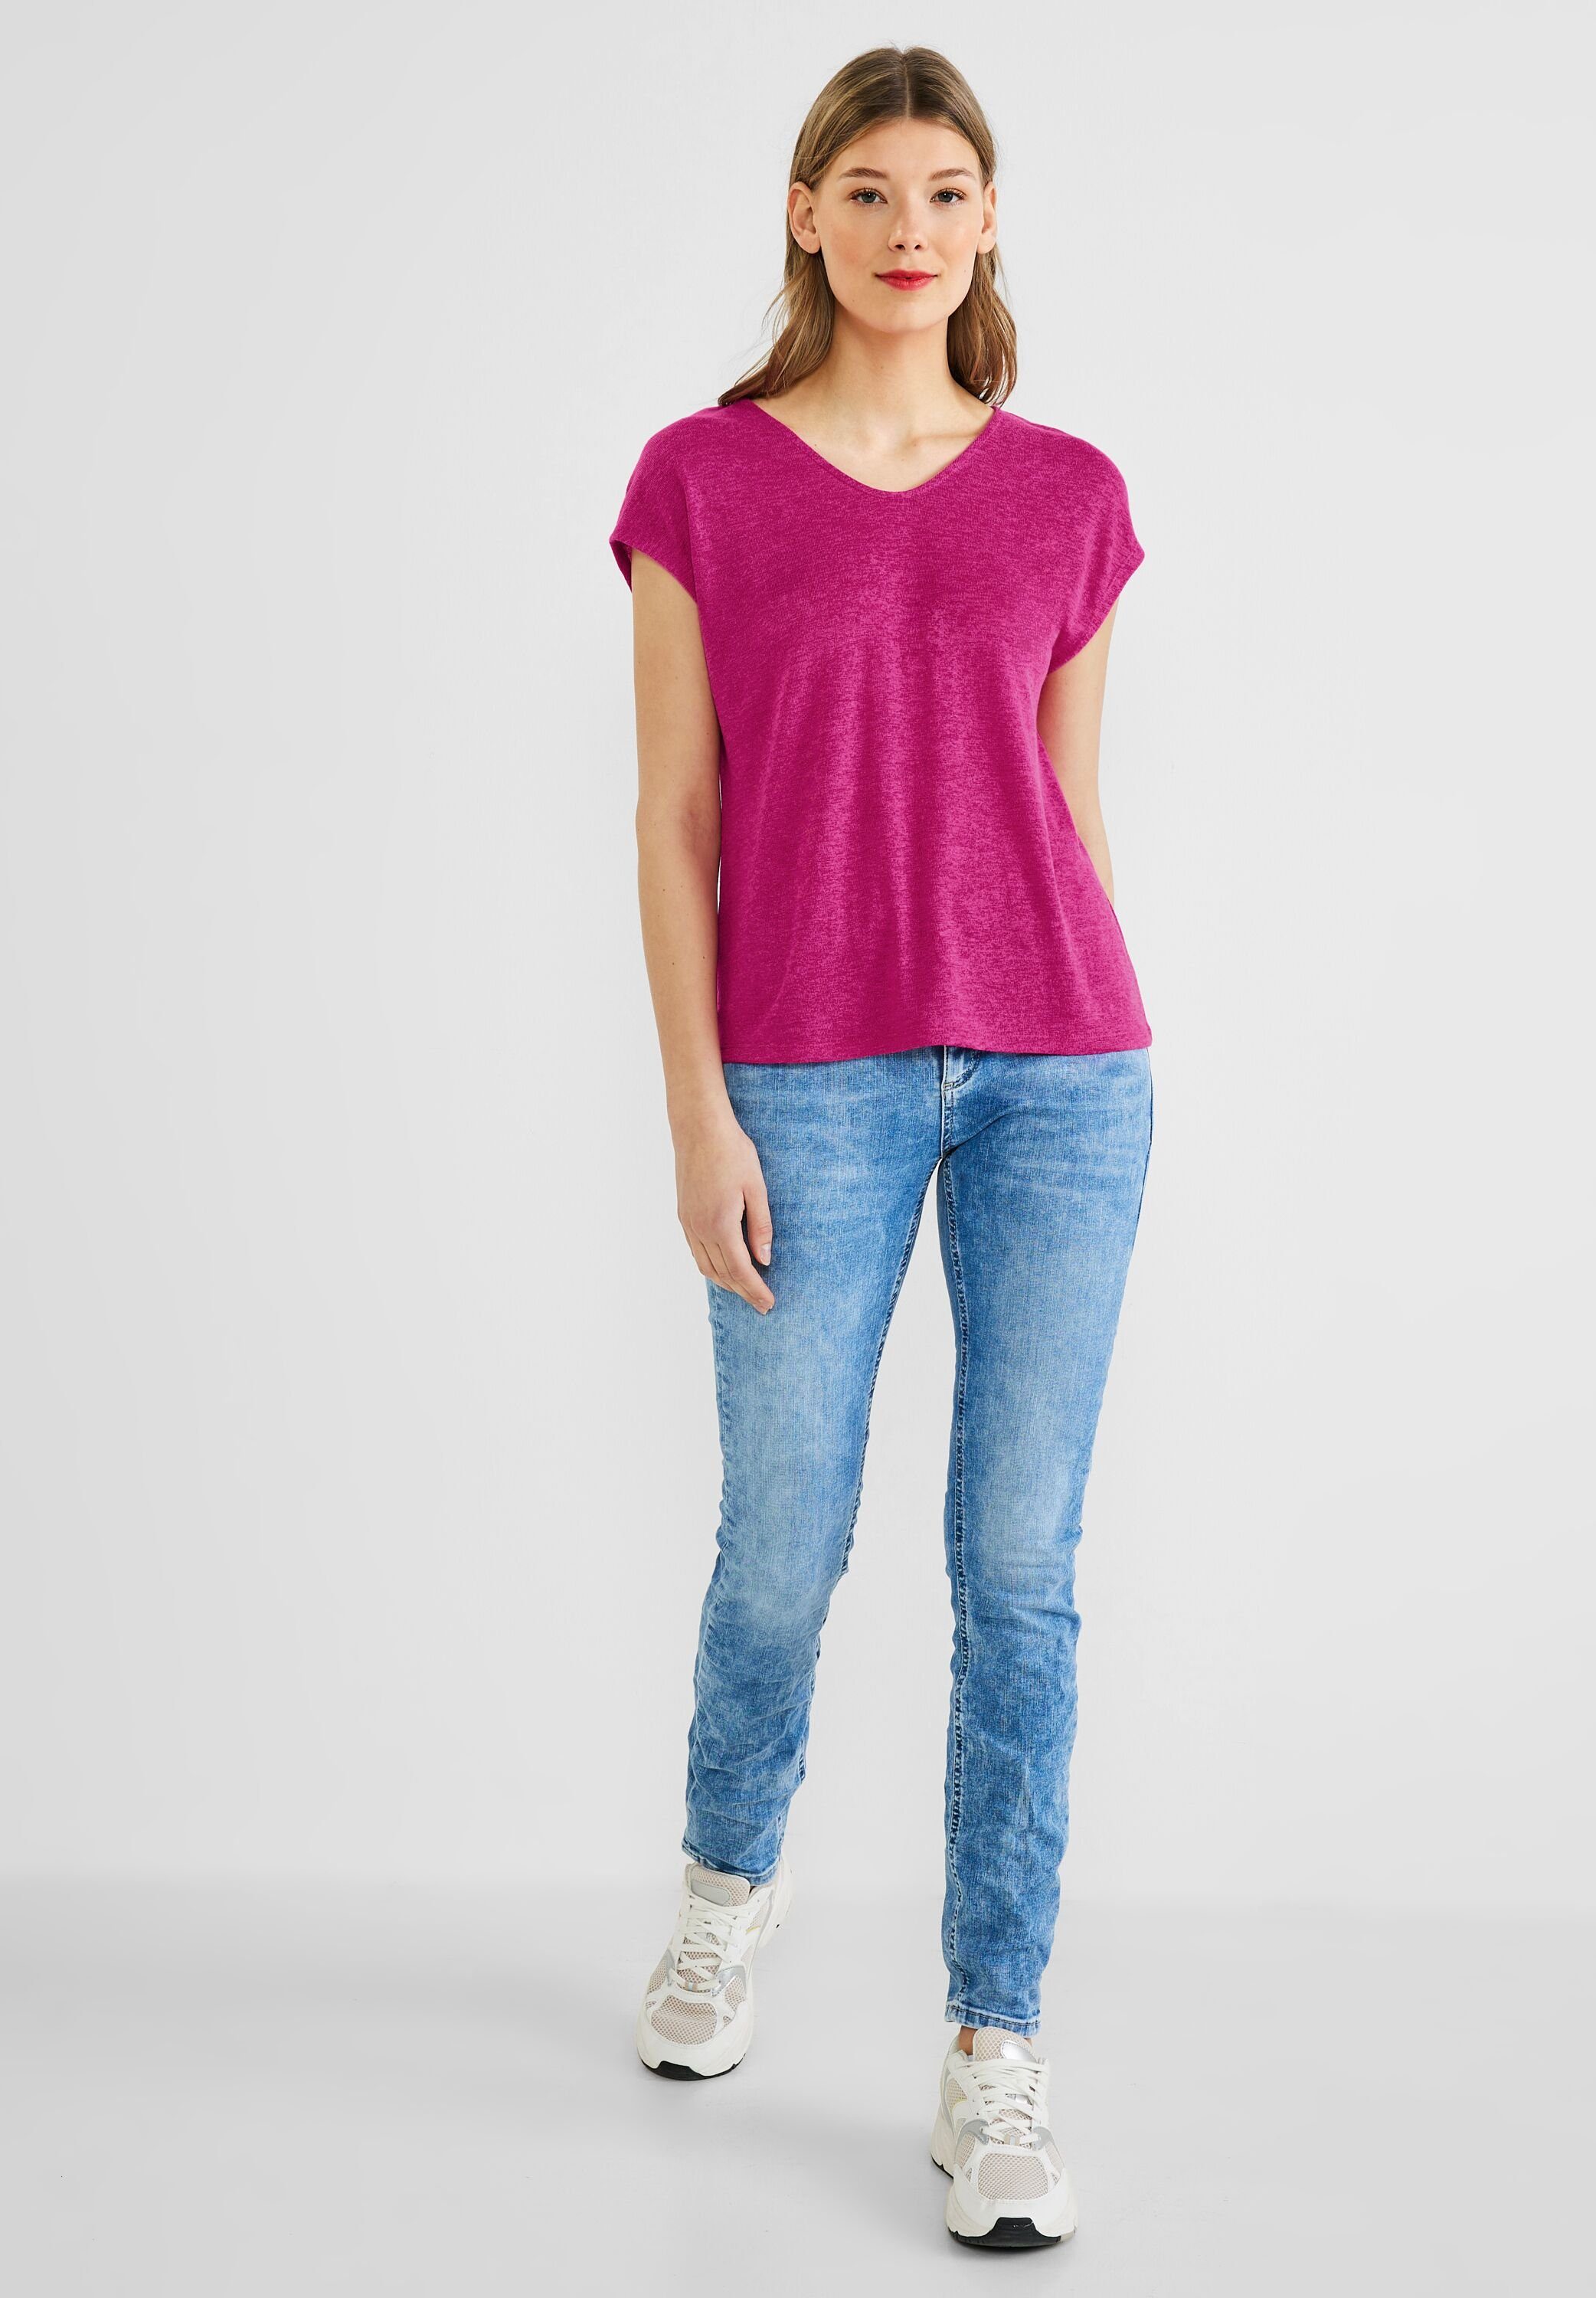 ONE Unifarbe V-Shirt pink oasis STREET in